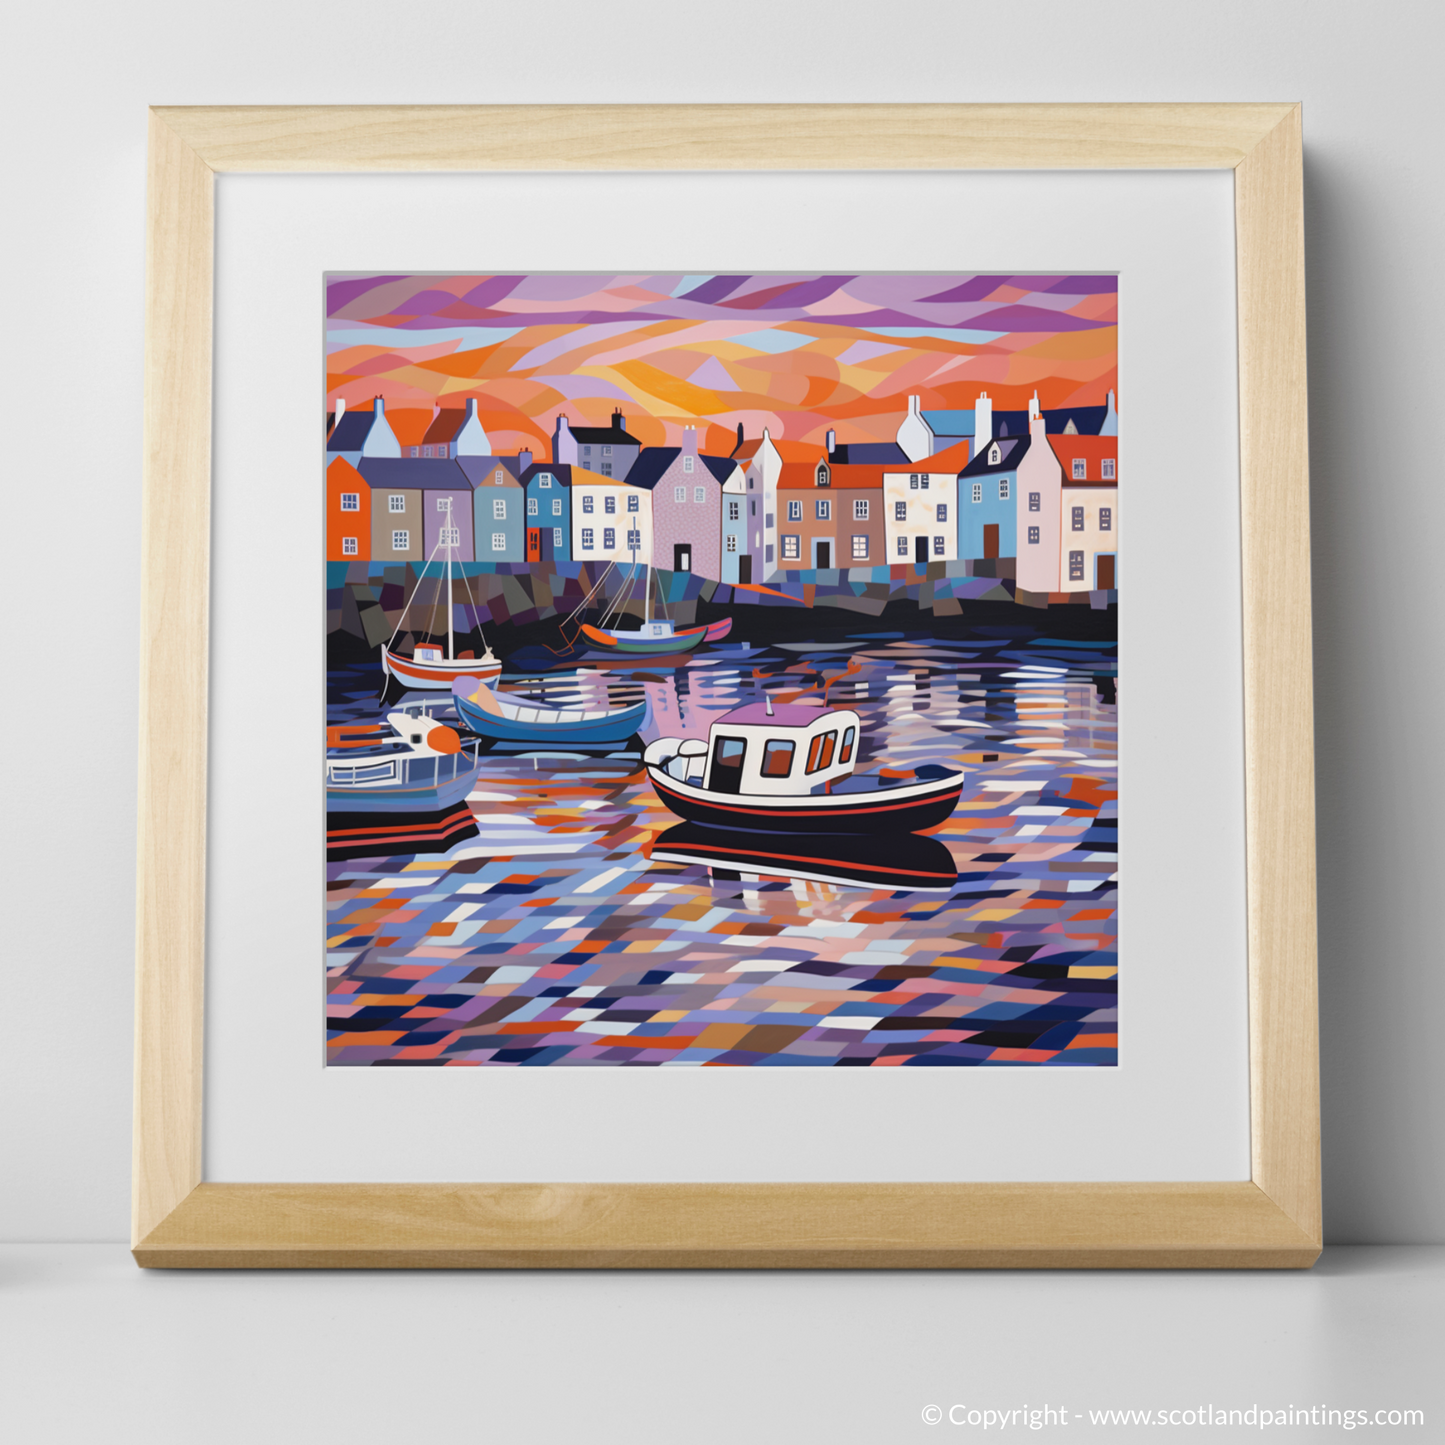 Dusk at Pittenweem Harbour: An Abstract Reverie